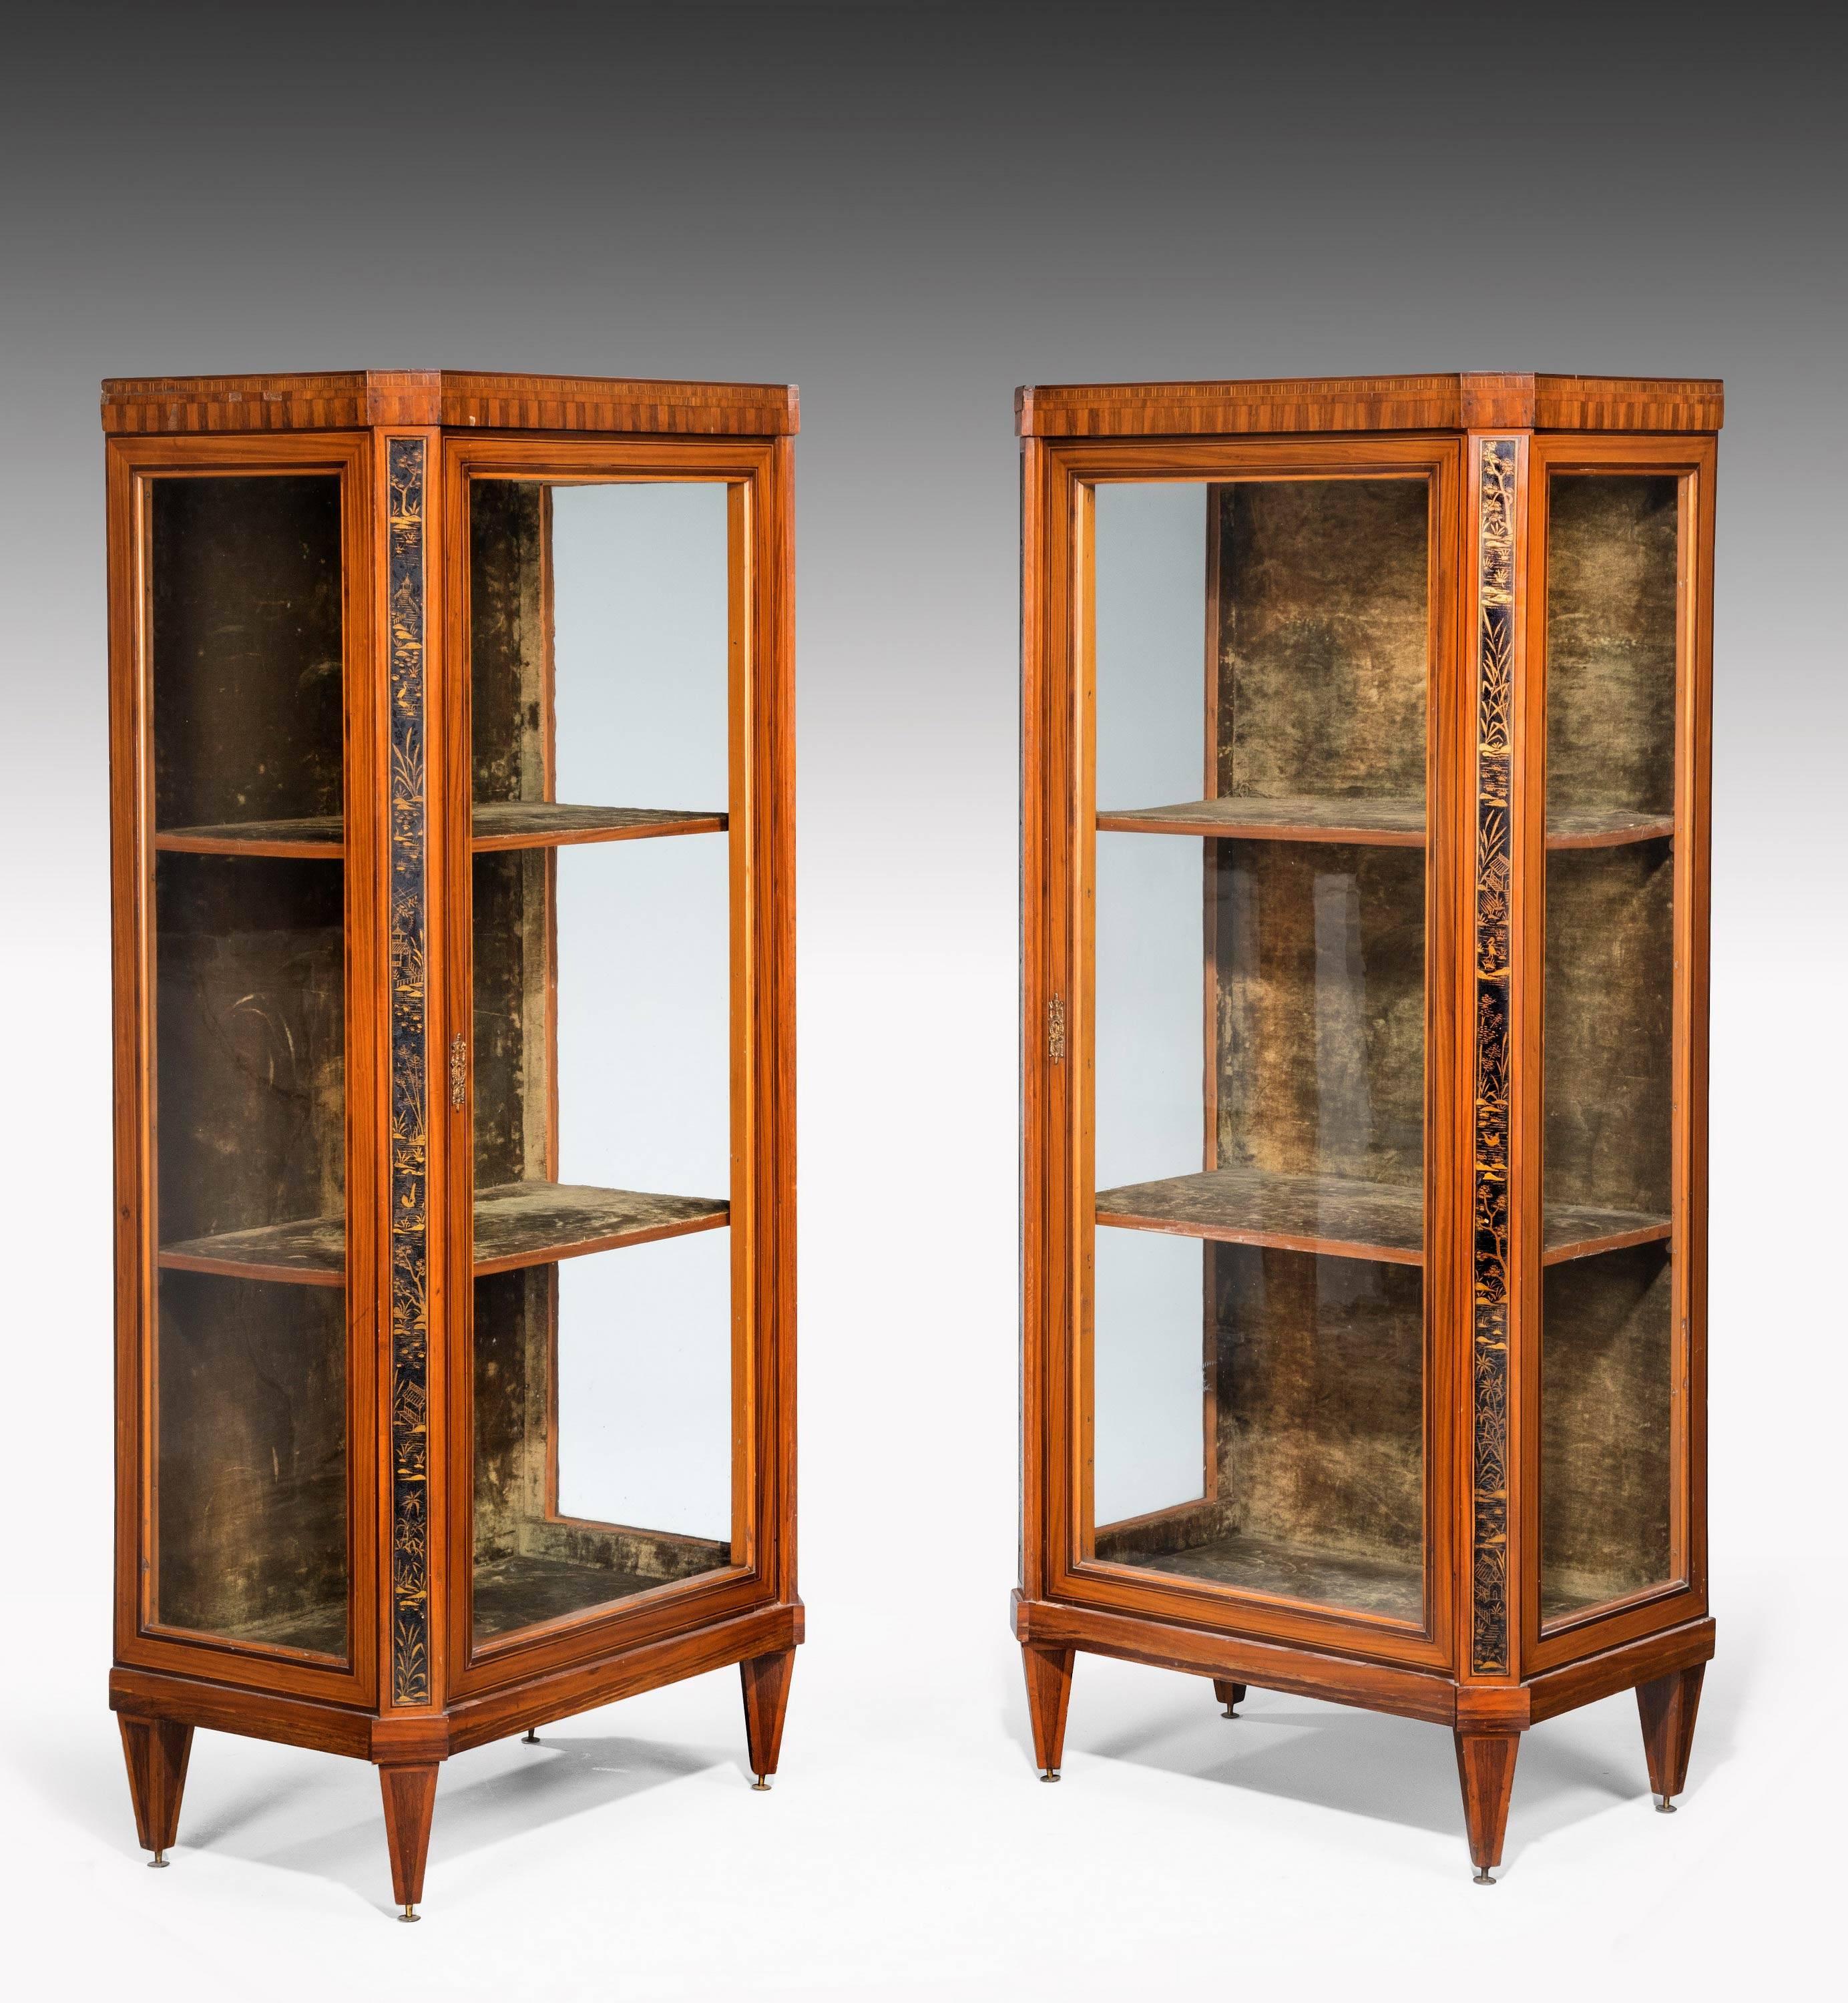 Pair of Late 19th Century French Satinwood Display Cabinets In Good Condition In Peterborough, Northamptonshire